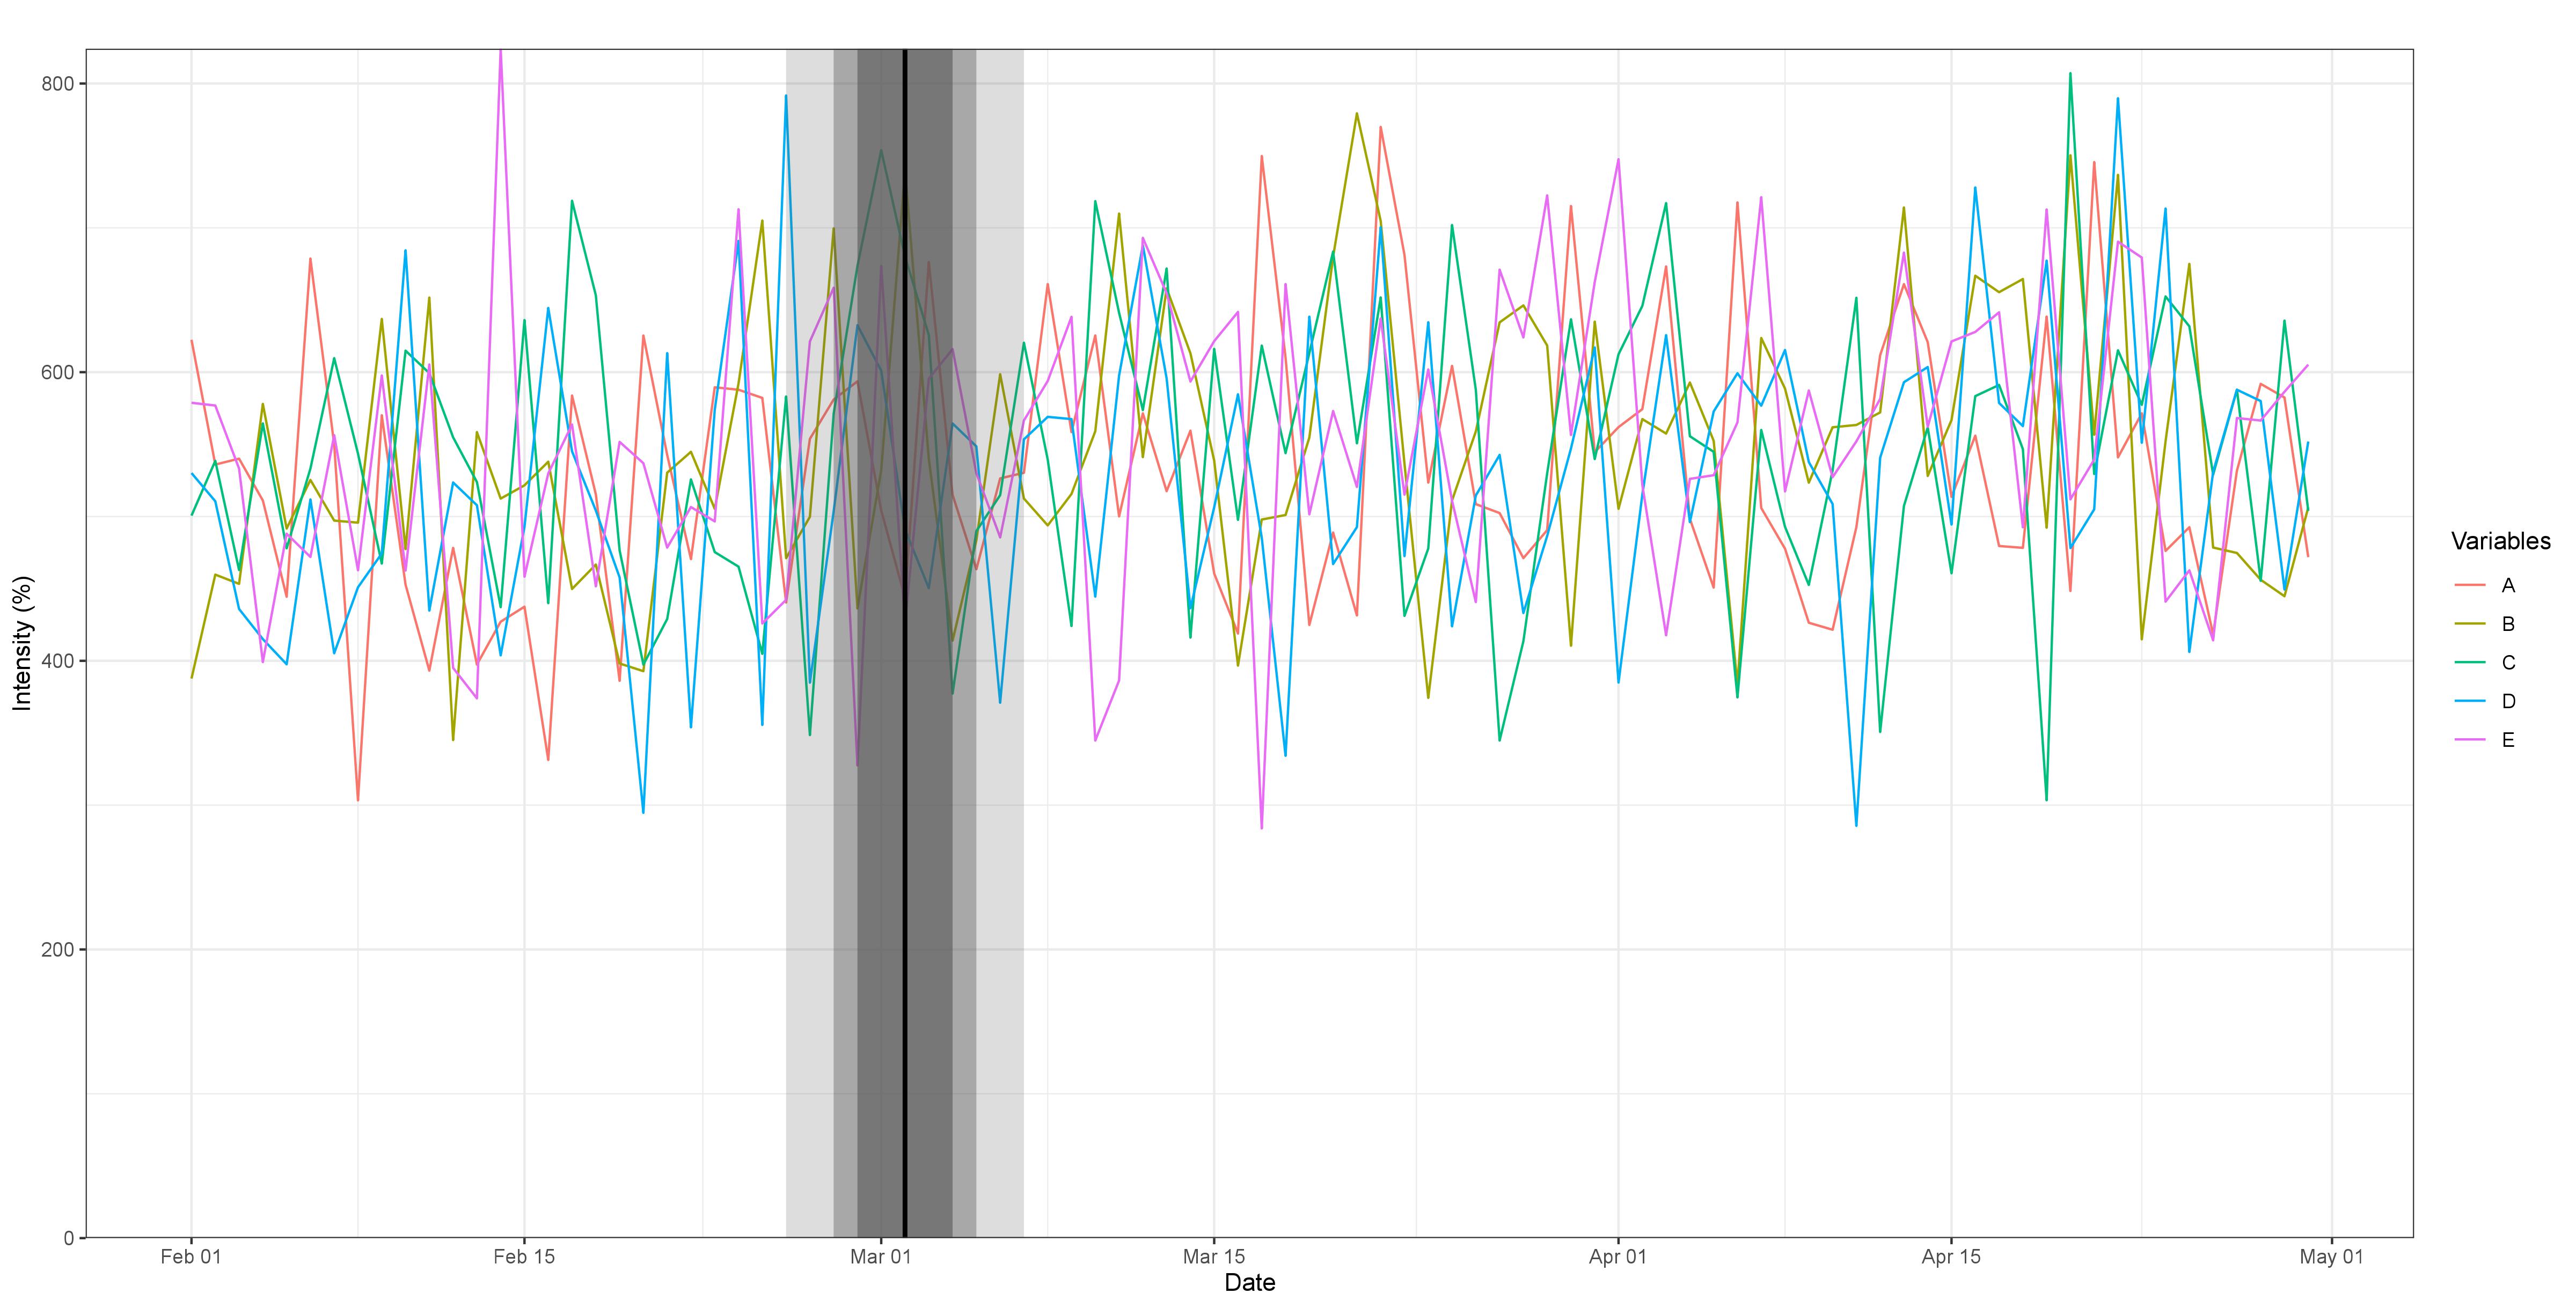 Fig 2. Break detection for five simulated variables experiencing a common break at 35% of the sample, with an intensity parameter of 0.5. The order of the VAR(q) is 1, after selection by the BIC, with no trend or additional covariates added. The break is impossible to detect visually. However, the algorithm accurately captures it. Max F-statistic: 22.72 and the confidence intervals for 90%, 95% and 99%, represented by the shaded areas are much wider.